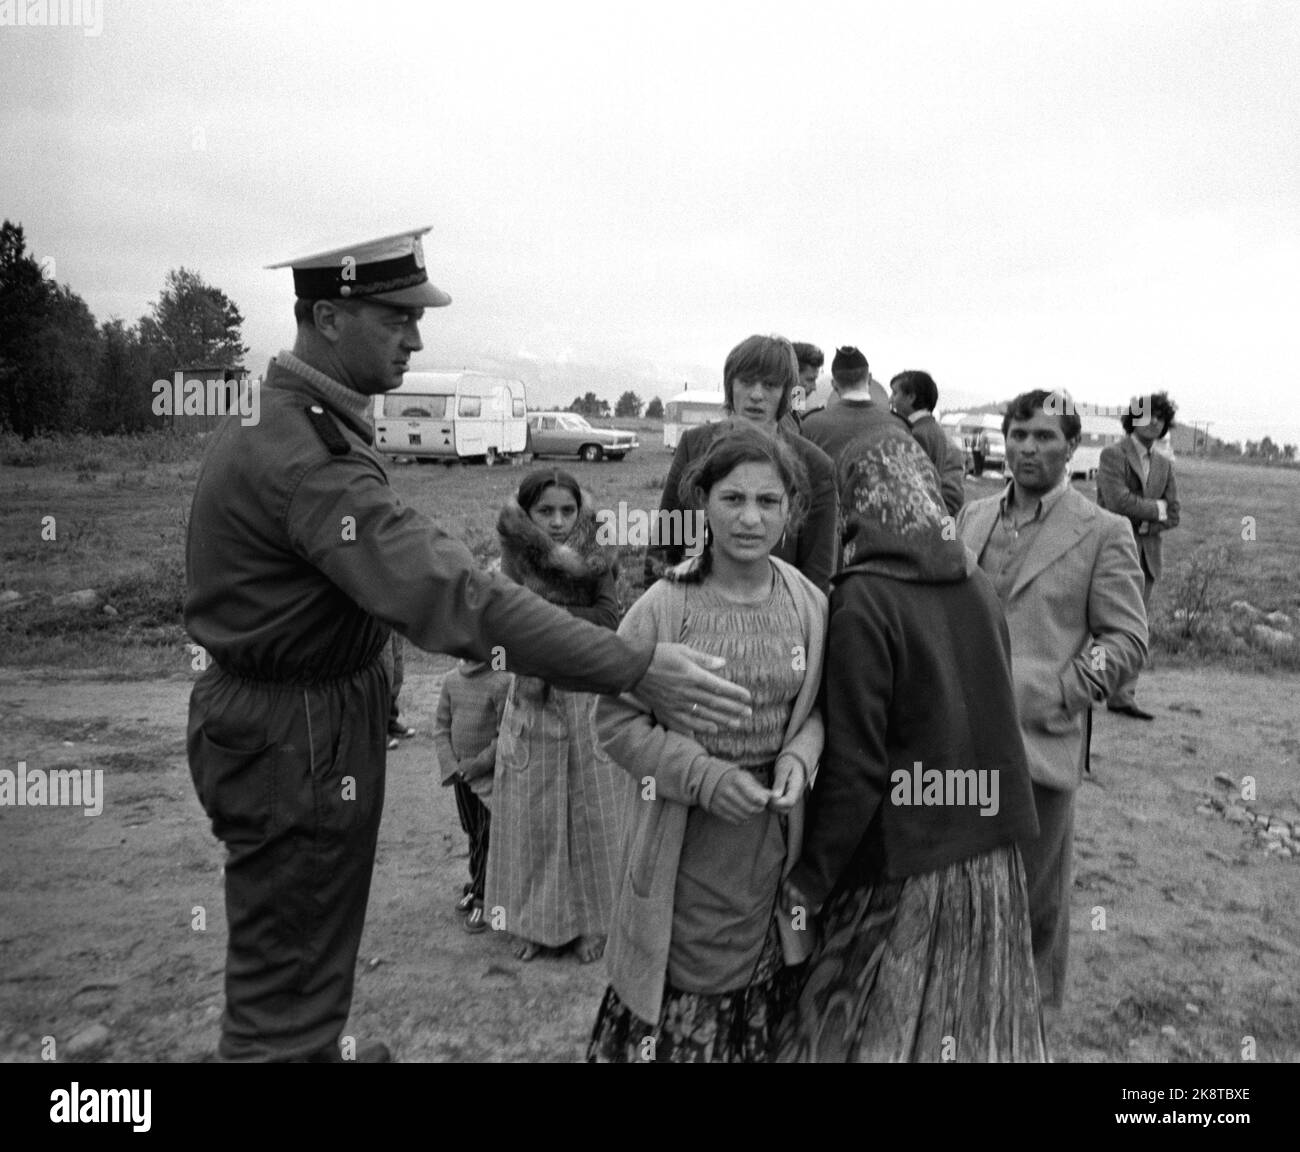 Innhavet, Hamarøy 197206. Police in Gypsy camp in the Innhavet. The Gypsy Company of 65 Stateless Gypsies, who came to Norway from Finland without an entry permit, was expelled and transported out of the country with police cards. Photo Åge Storløkken / Current / NTB Stock Photo